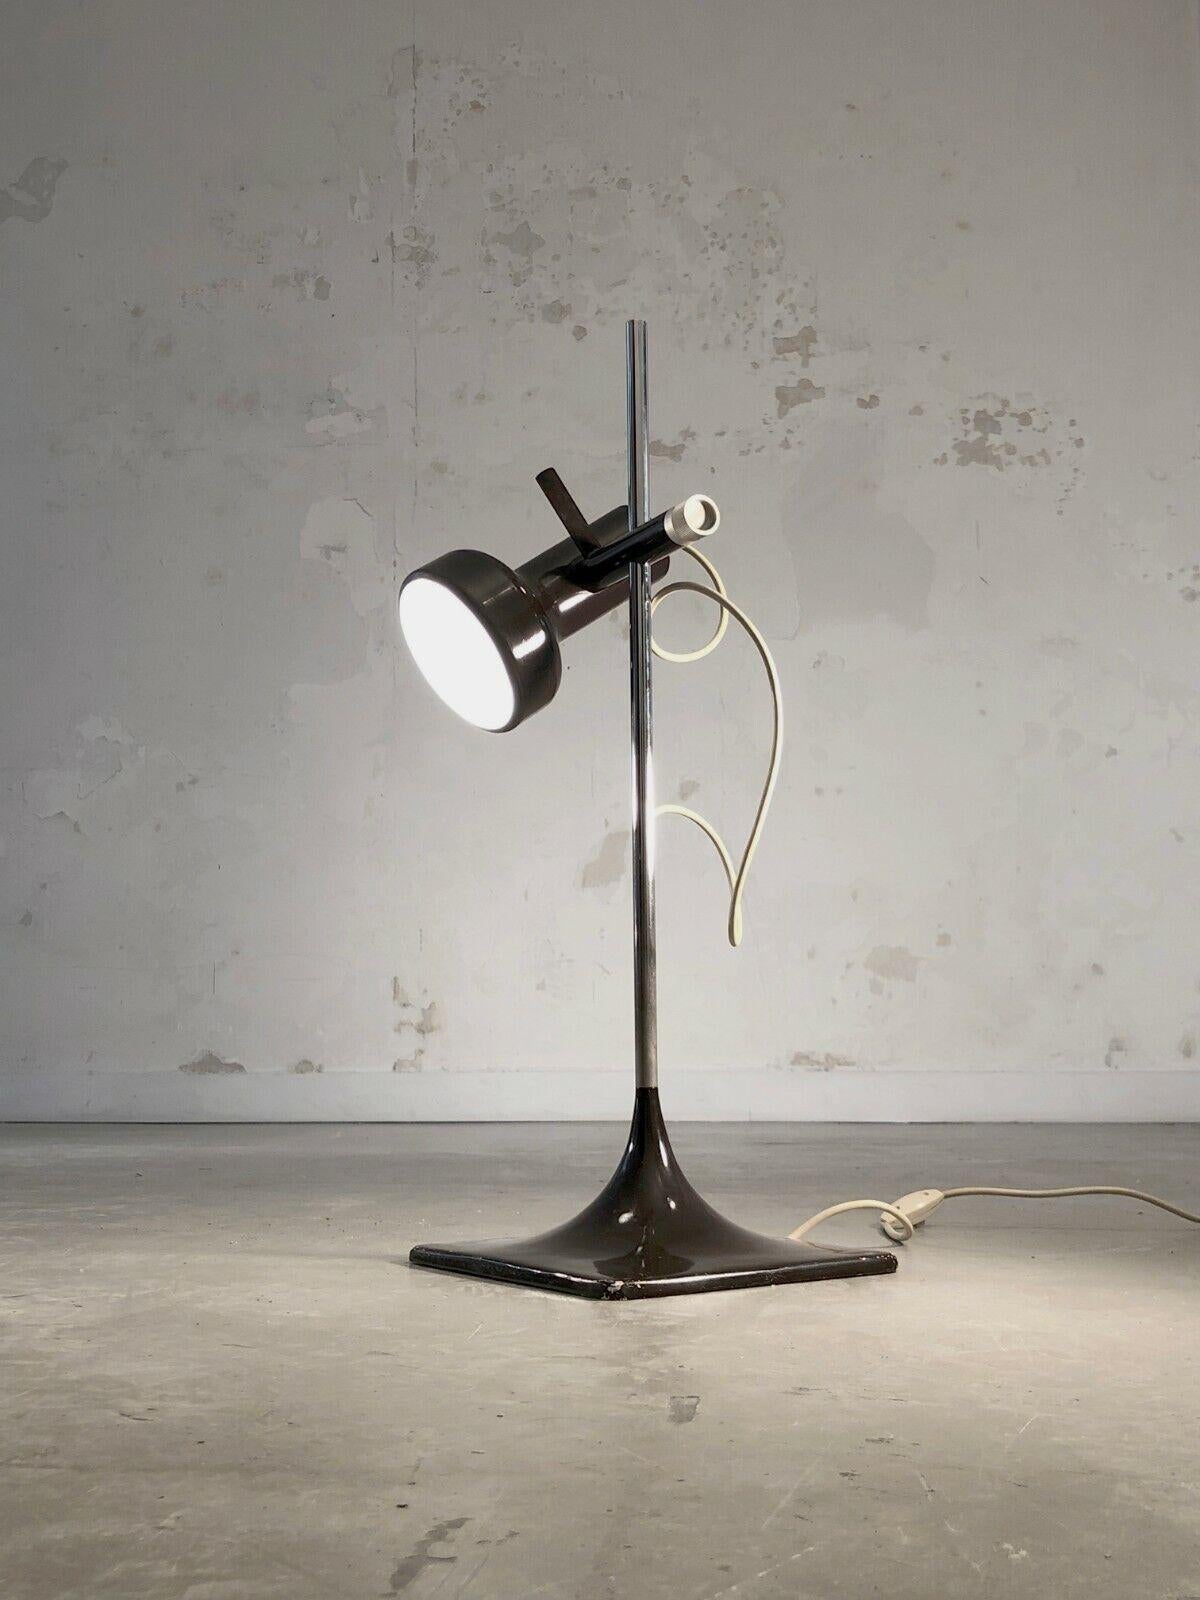 A table or desk lamp, Post-Modernist, Free-Form, Seventies, Space-Age, square base with rounded lines in brown lacquered metal, vertical stem in chrome-plated metal, adjustable spotlight in brown lacquered metal, model F-162 by Etienne Fermigier,